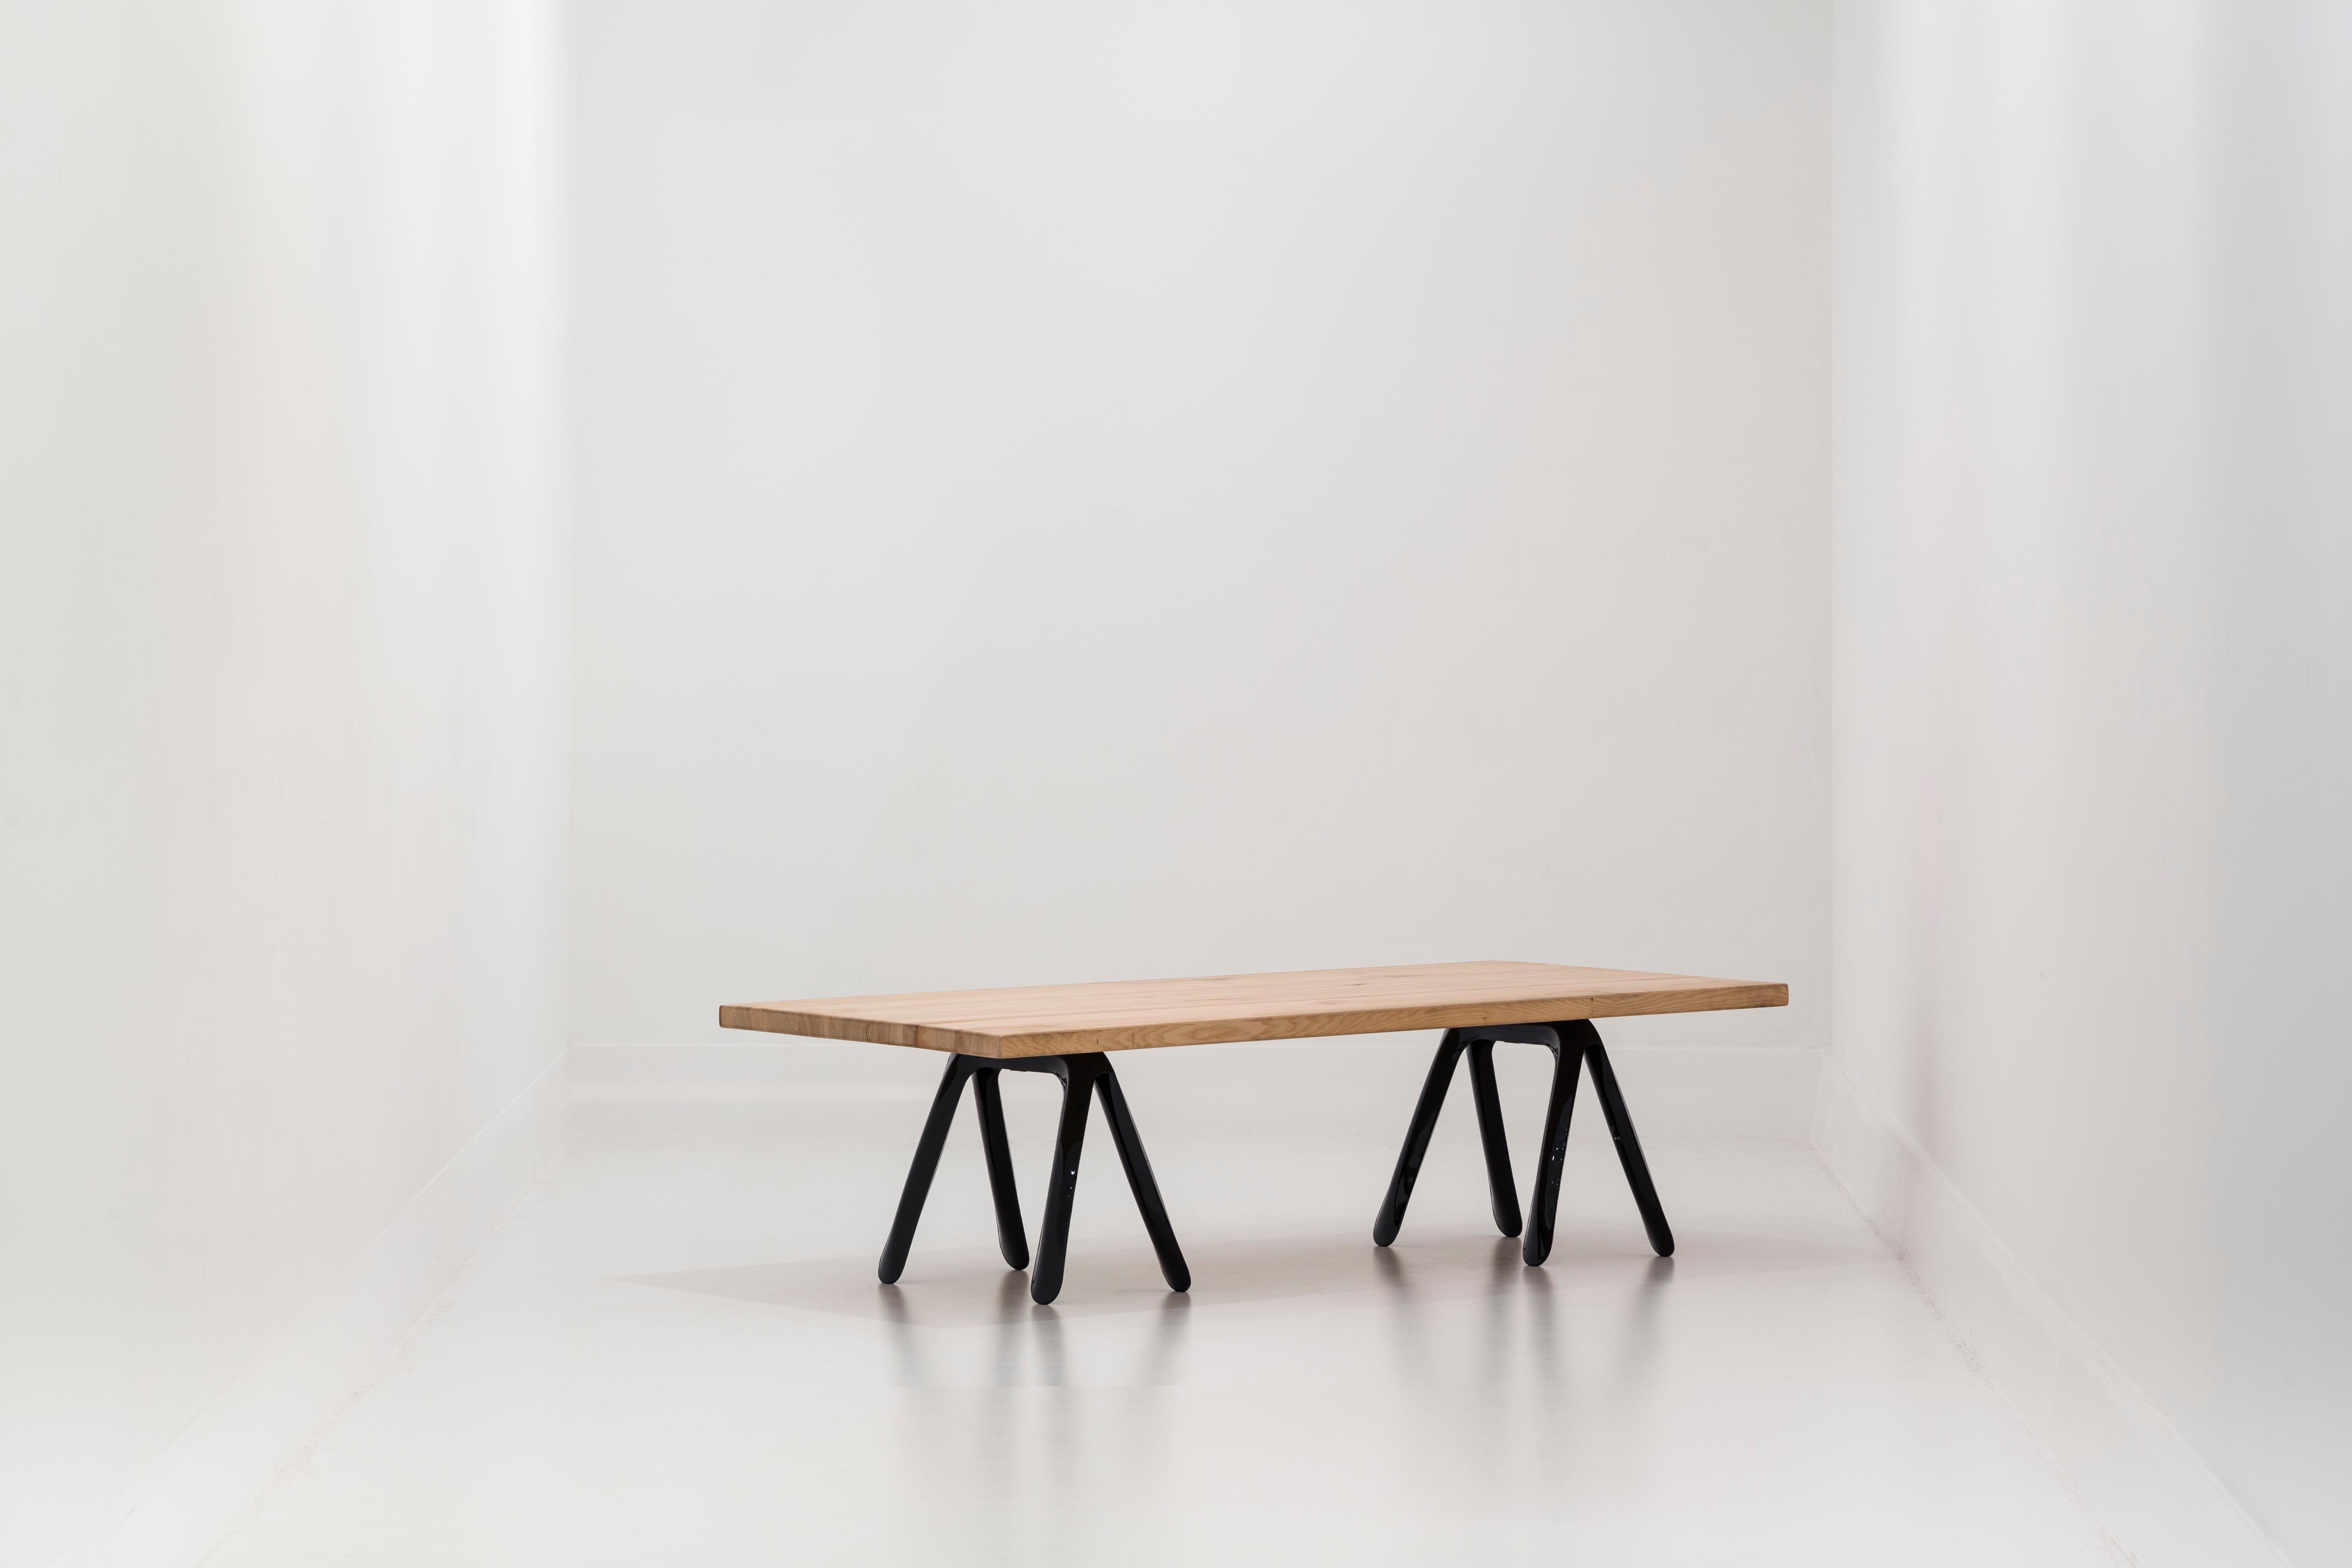 Kozka is our new member of table structures. It is a multitasking construction. Acording to different table tops, it could be used either as a coffee table or even as a part of unique bench.

Kozka is available in stainless steel and carbon steel